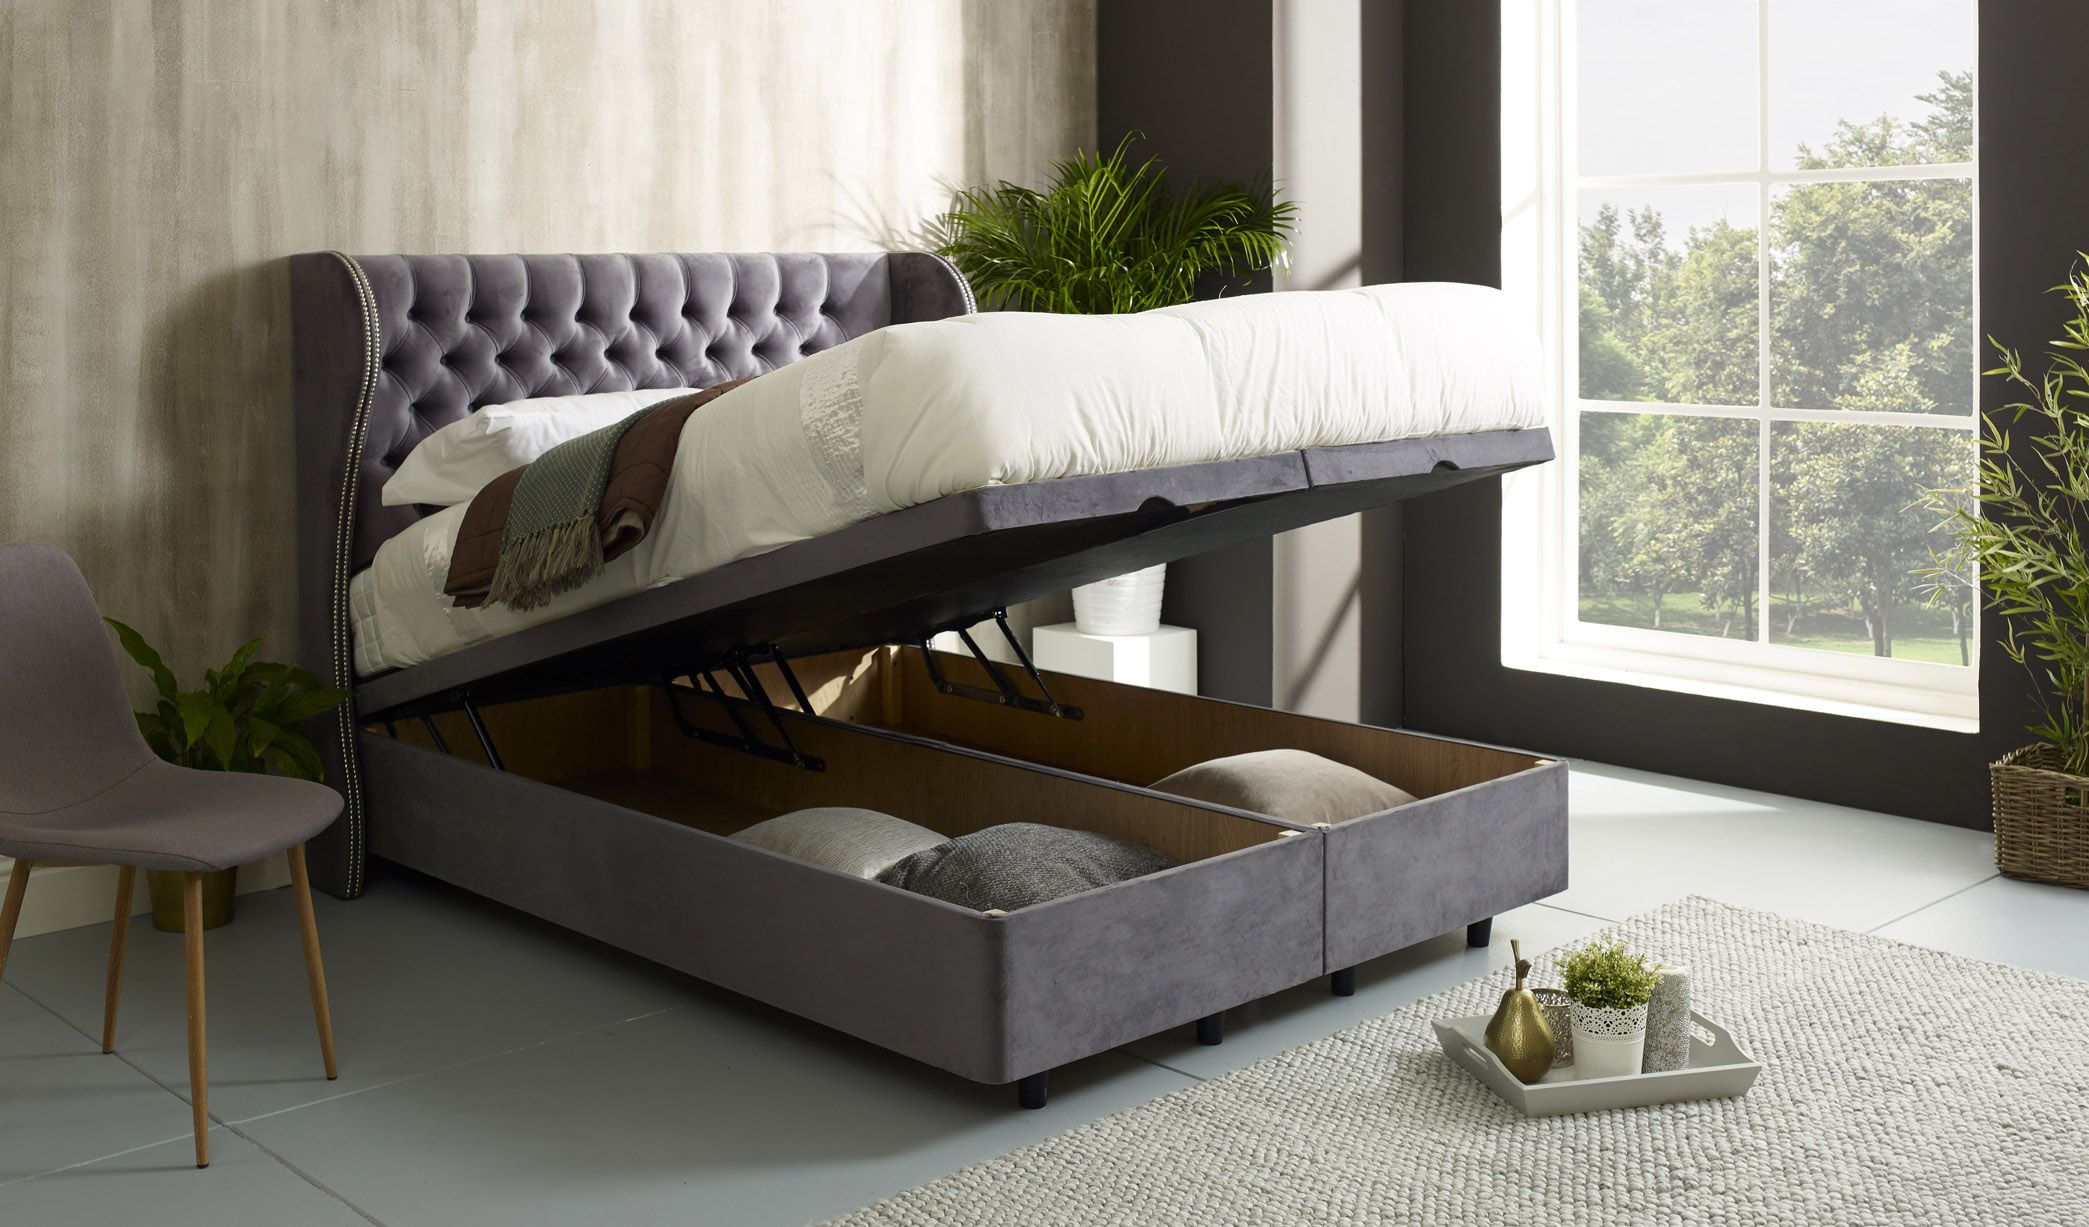 Giovana Wing Floating Ottoman Bed Frame With Studs – Bedworld Within Floating Ottomans (View 7 of 20)